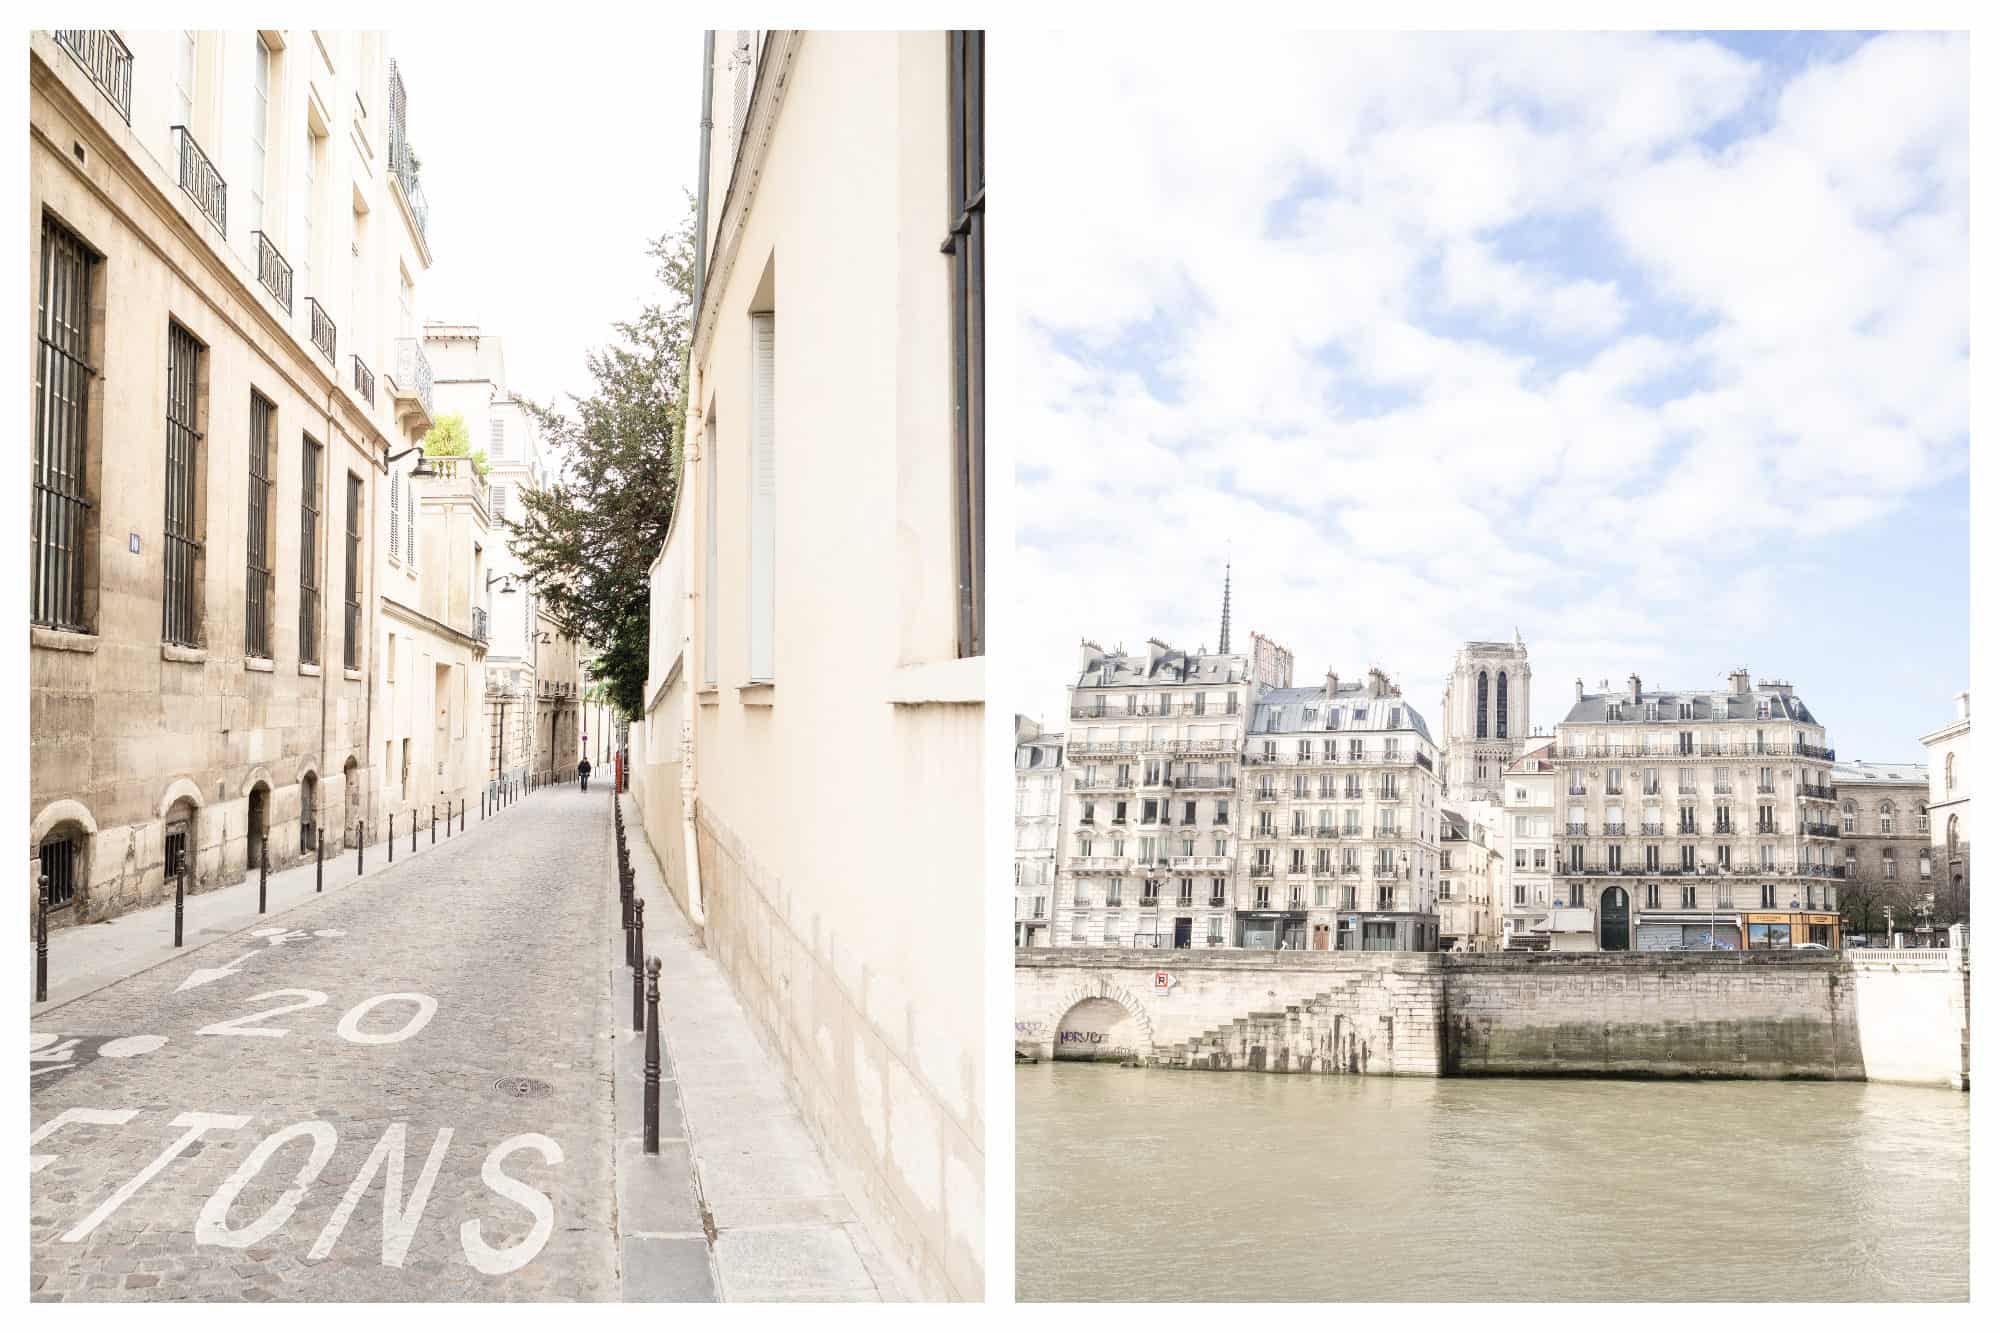 Cobblestone streets of Paris in the Marais (left) and a view of the beautiful stone buildings living the River Seine with Notre Dame peeping out from the top (right).